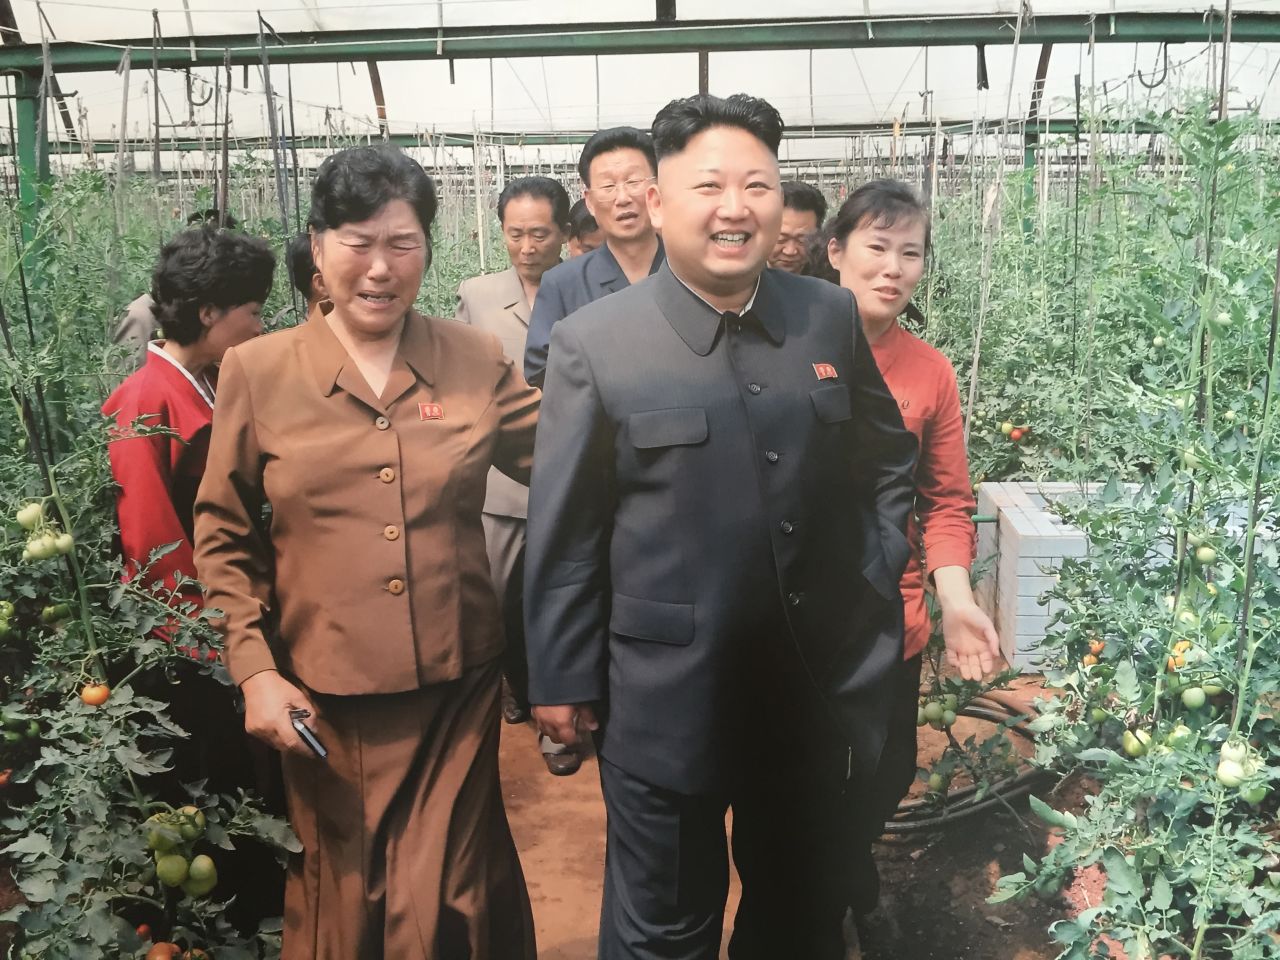 Kim Myong Yon, left, longtime manager of the Jang Chon cooperative farm, sobs as she gives North Korea's current supreme leader Kim Jong Un a tour of the greenhouse. "I was crying very heavily. It was so hot inside (the greenhouse). We felt so sorry for the leader's health," she said.